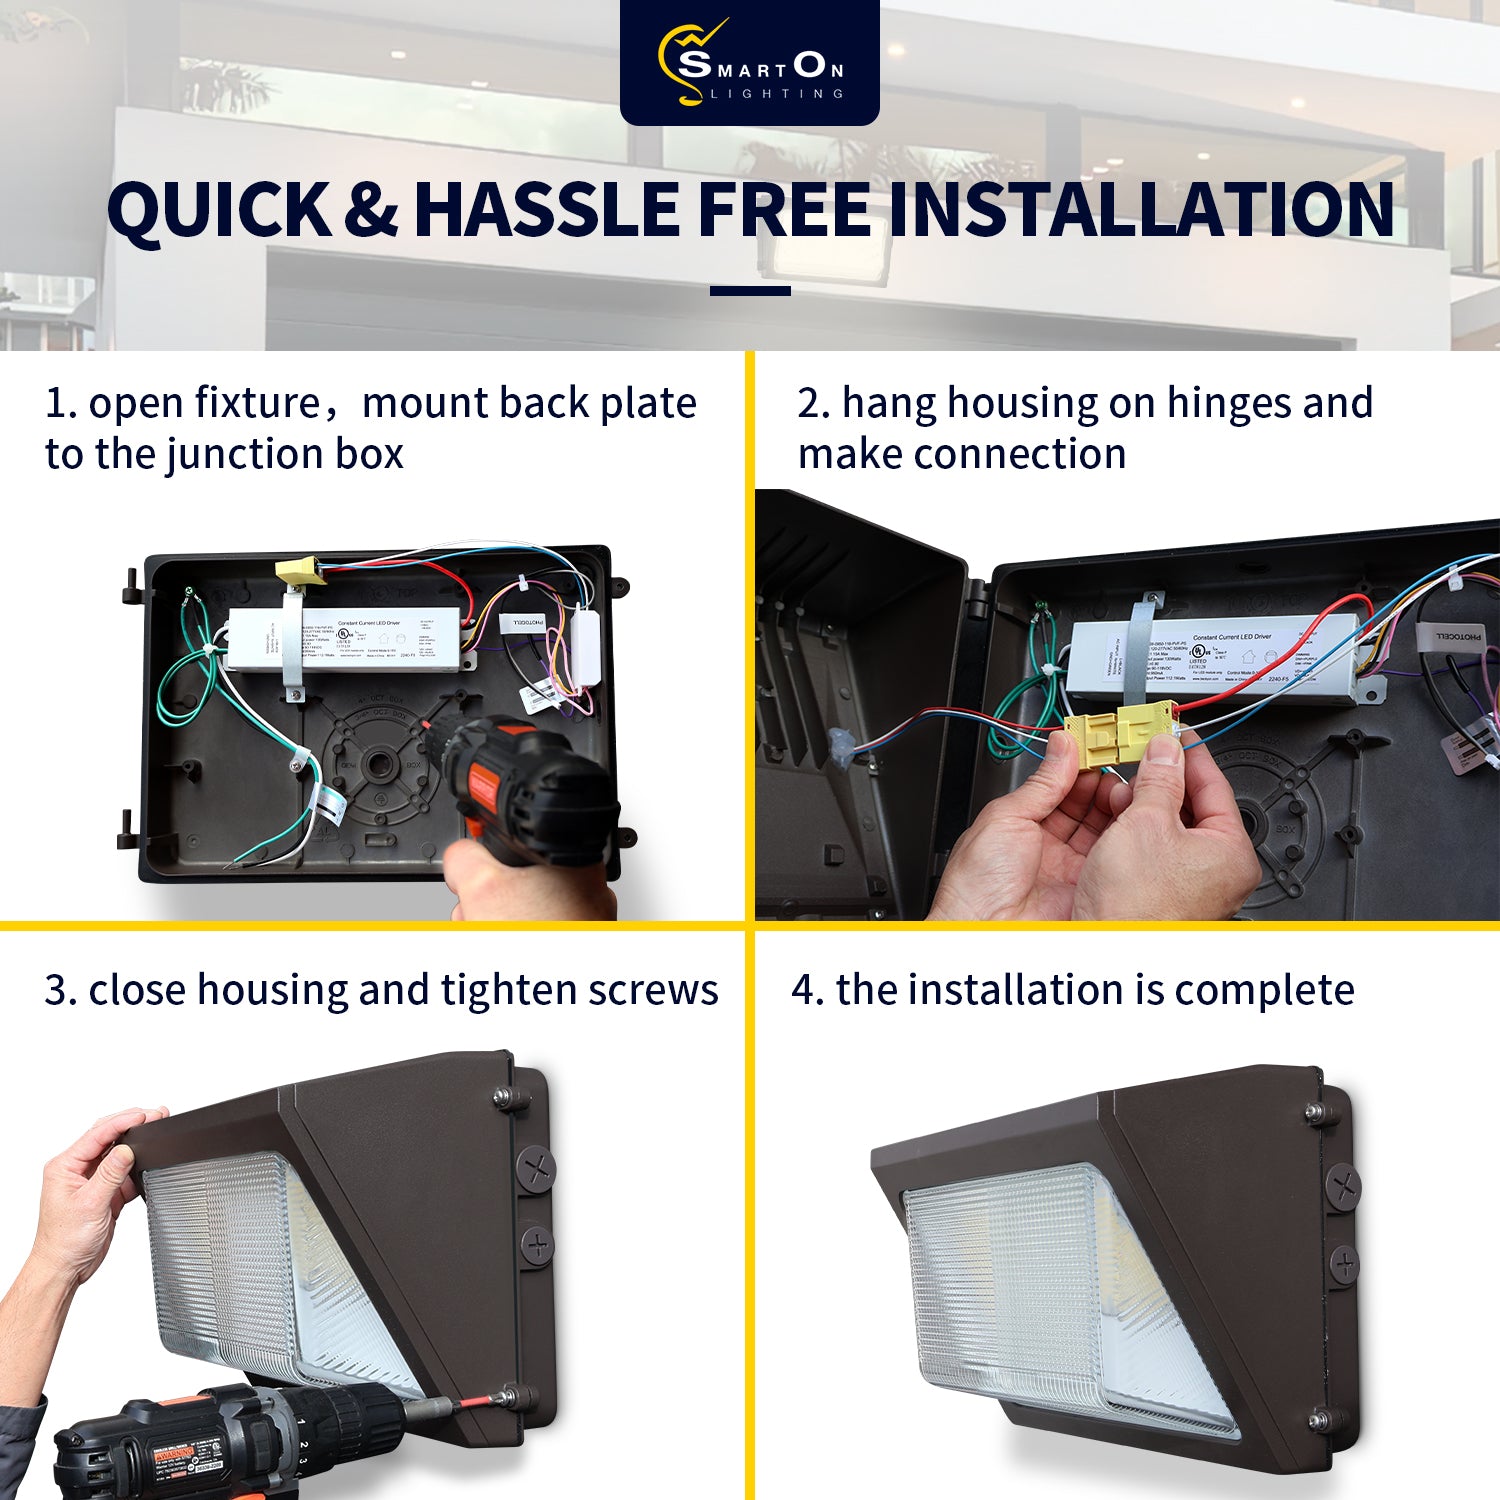 Easy to install & long-lasting